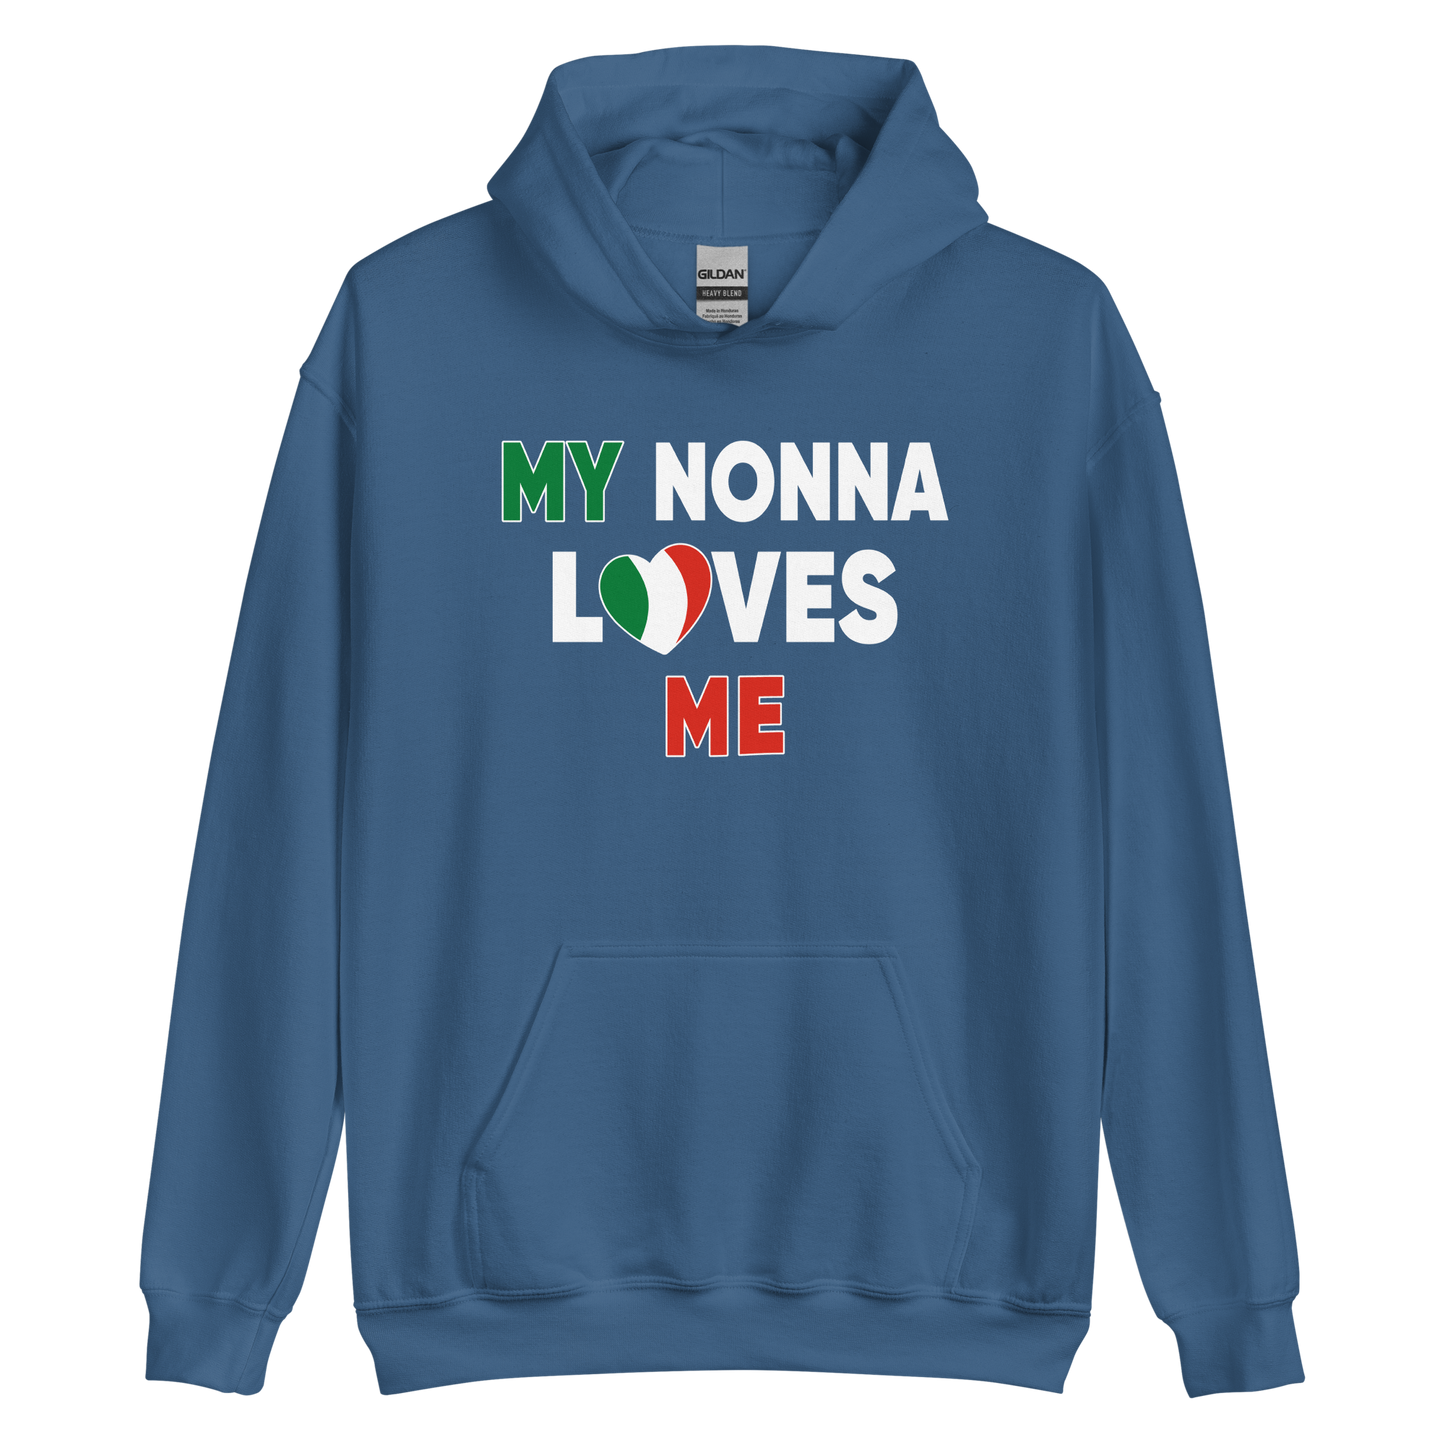 My Nonna Loves Me Italian Hoodie: Embrace Family Affection in Style- Vintage Hoodie for Italians